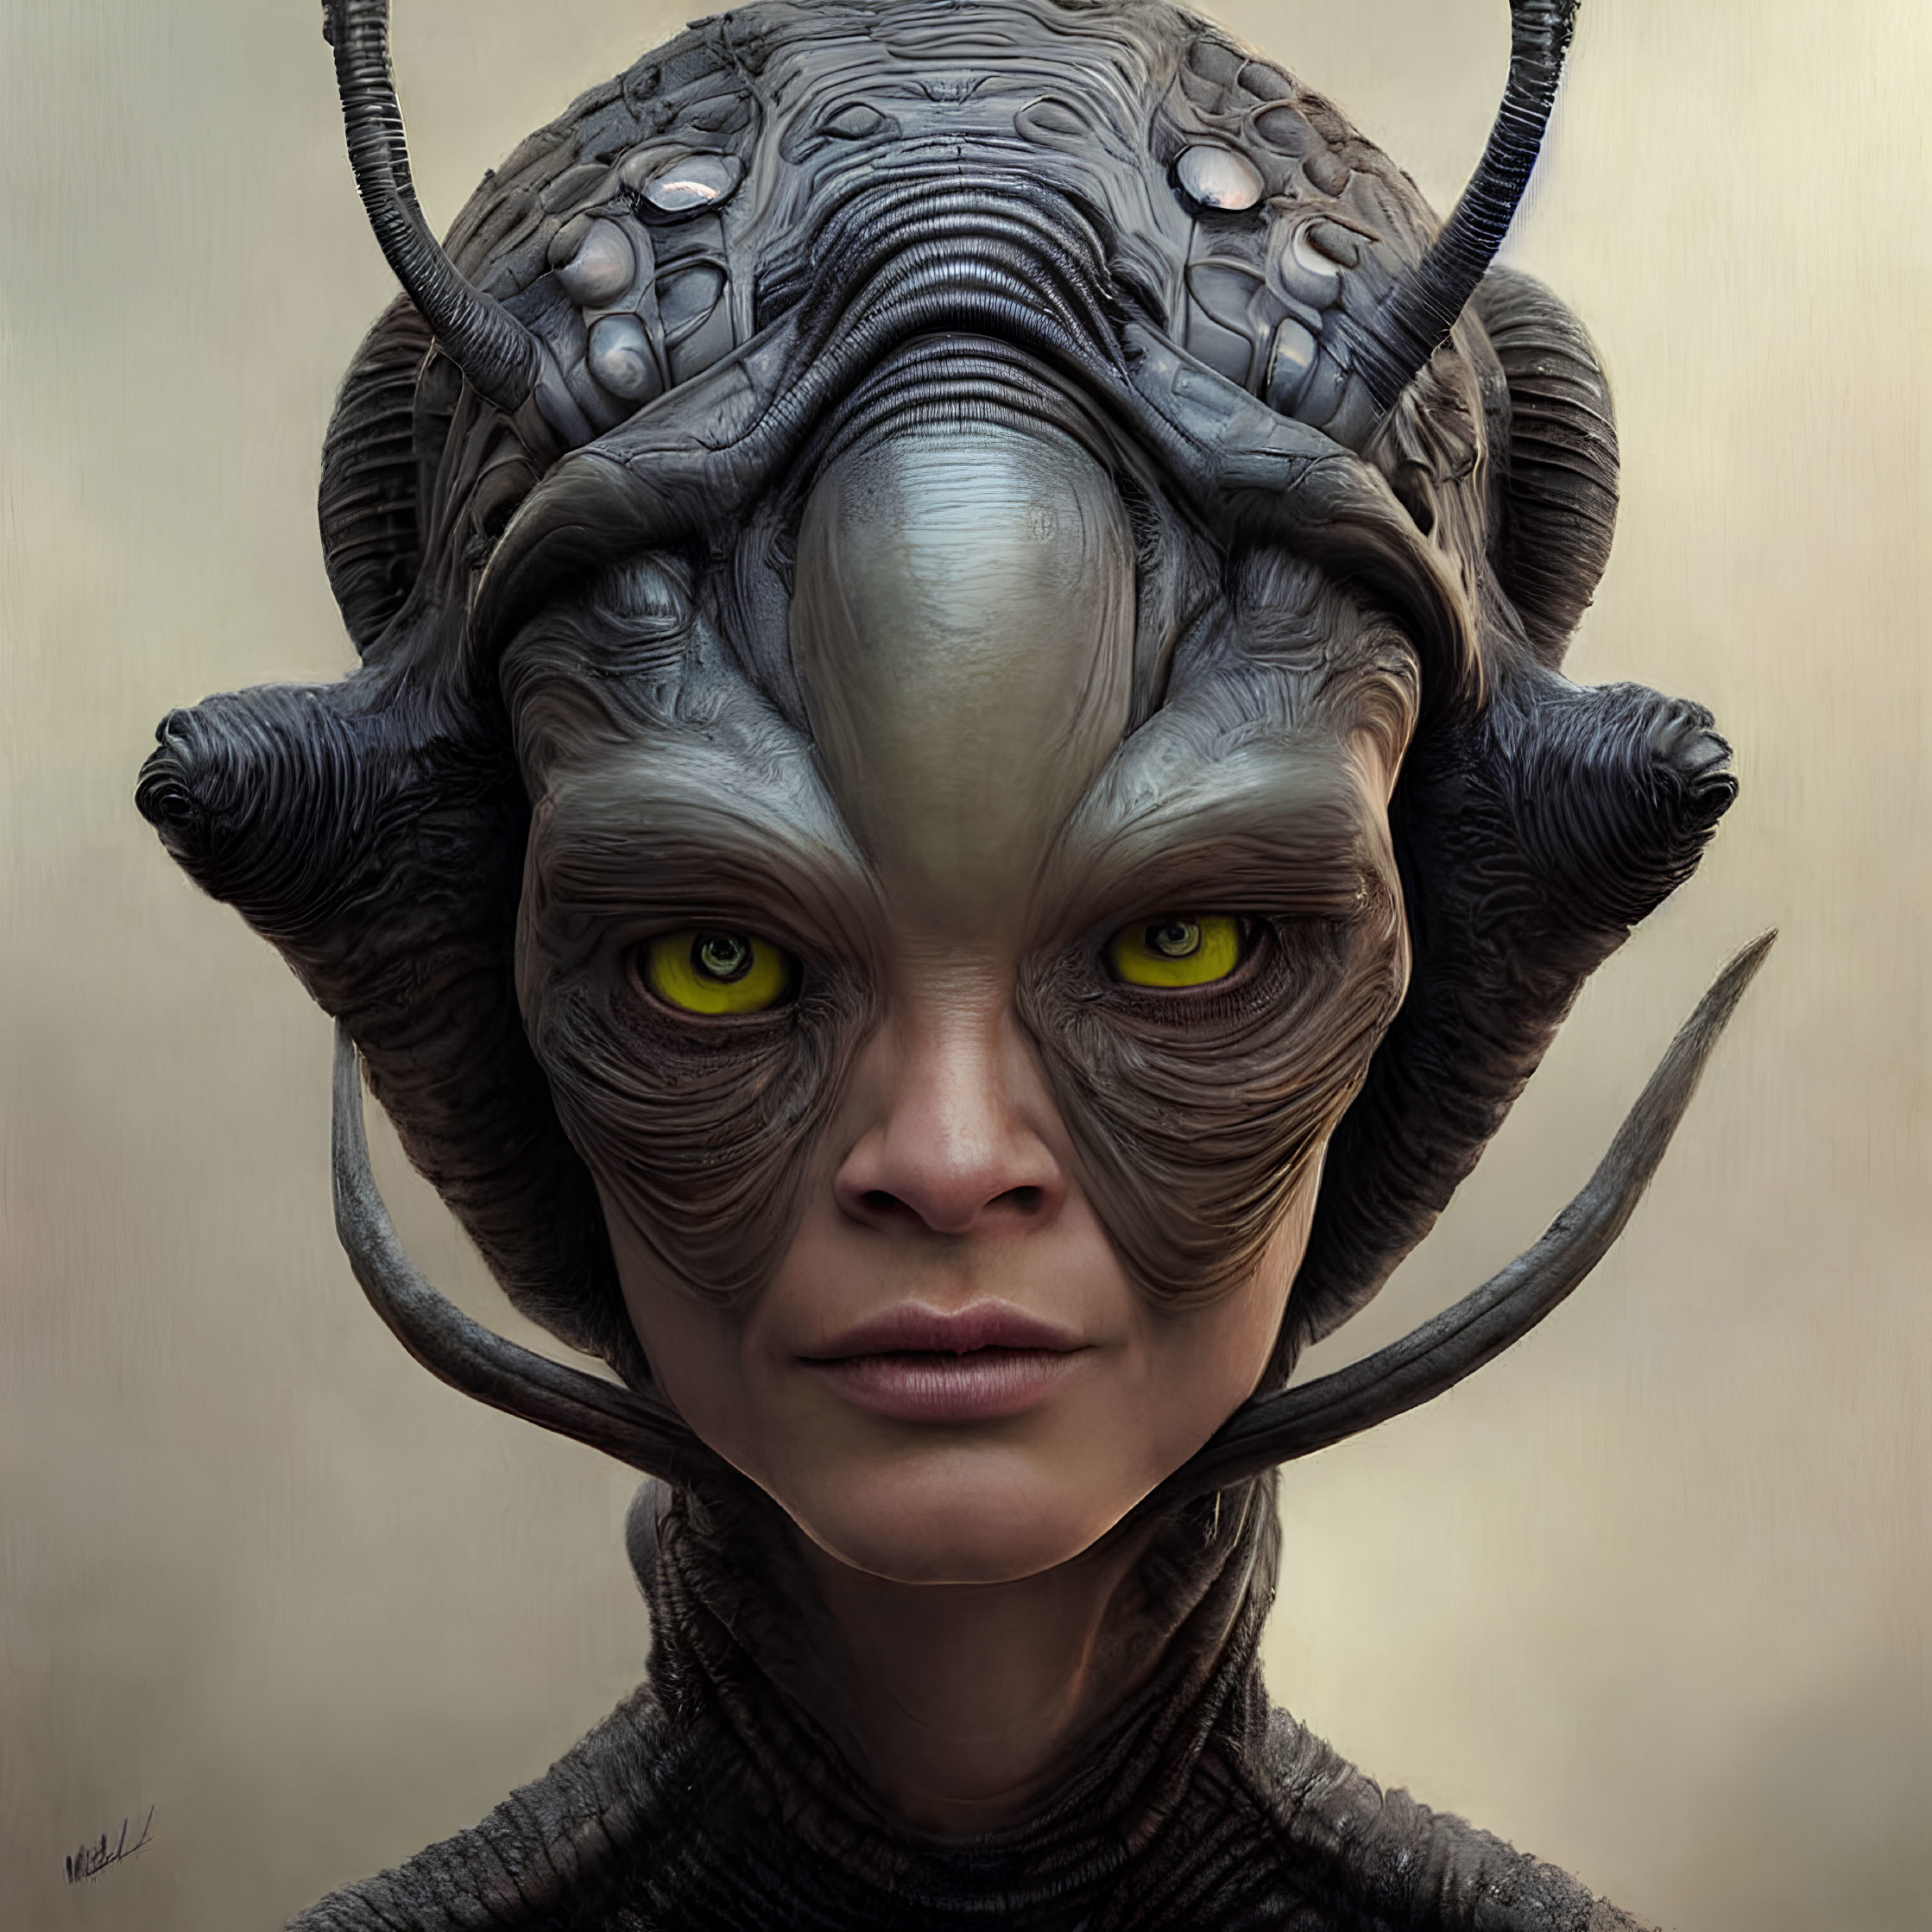 Detailed Digital Portrait of Alien Being with Large Yellow Eyes, Ornate Horns, and Textured Skin